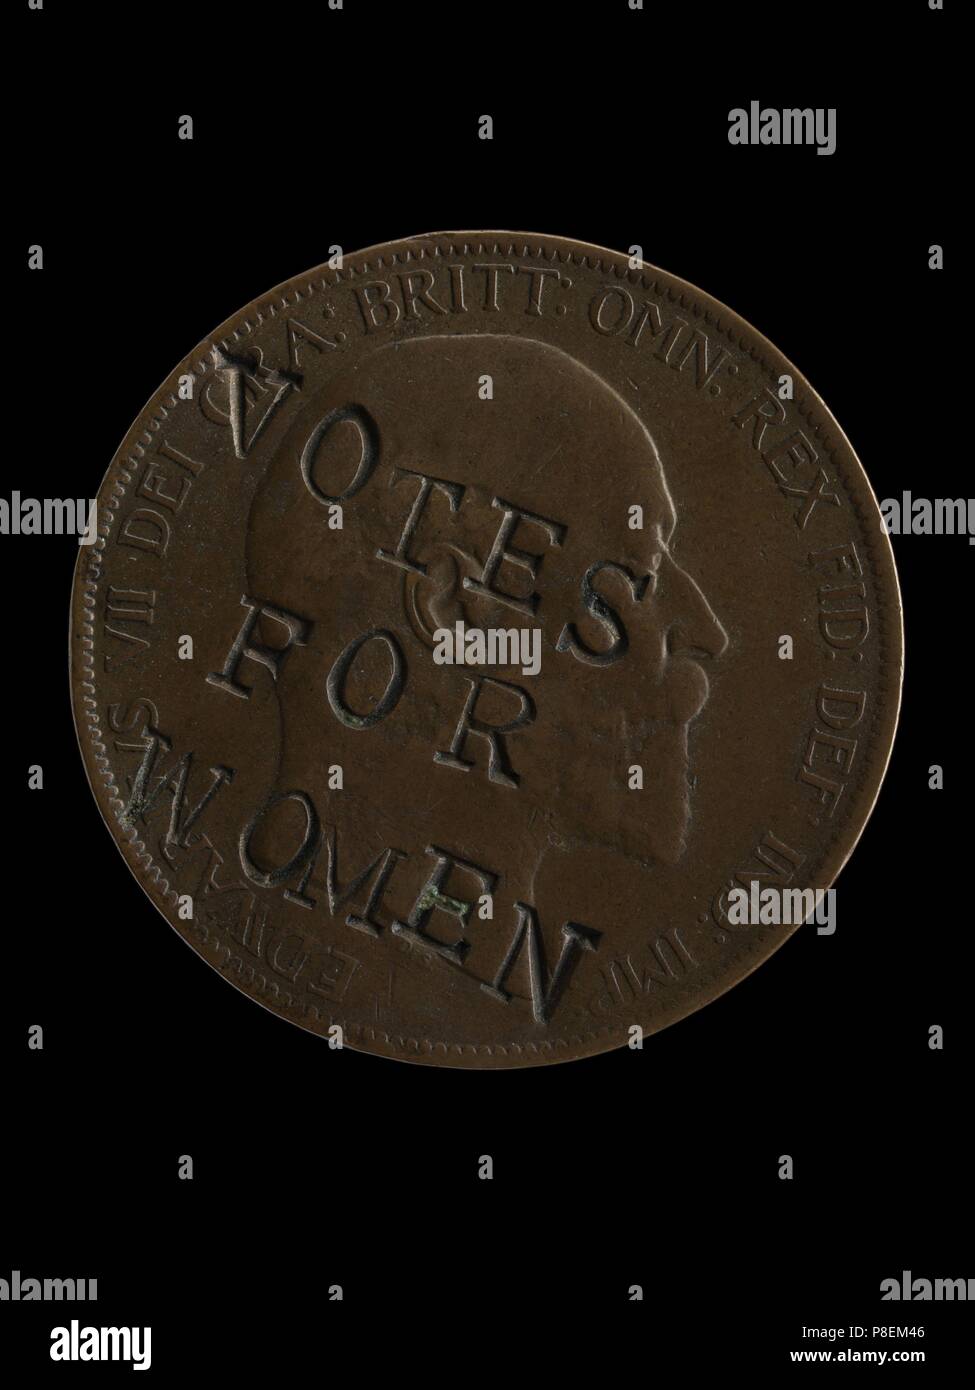 The Suffragette Penny with the slogan 'Votes for Women' over the portrait of King Edward VII. Museum: PRIVATE COLLECTION. Stock Photo